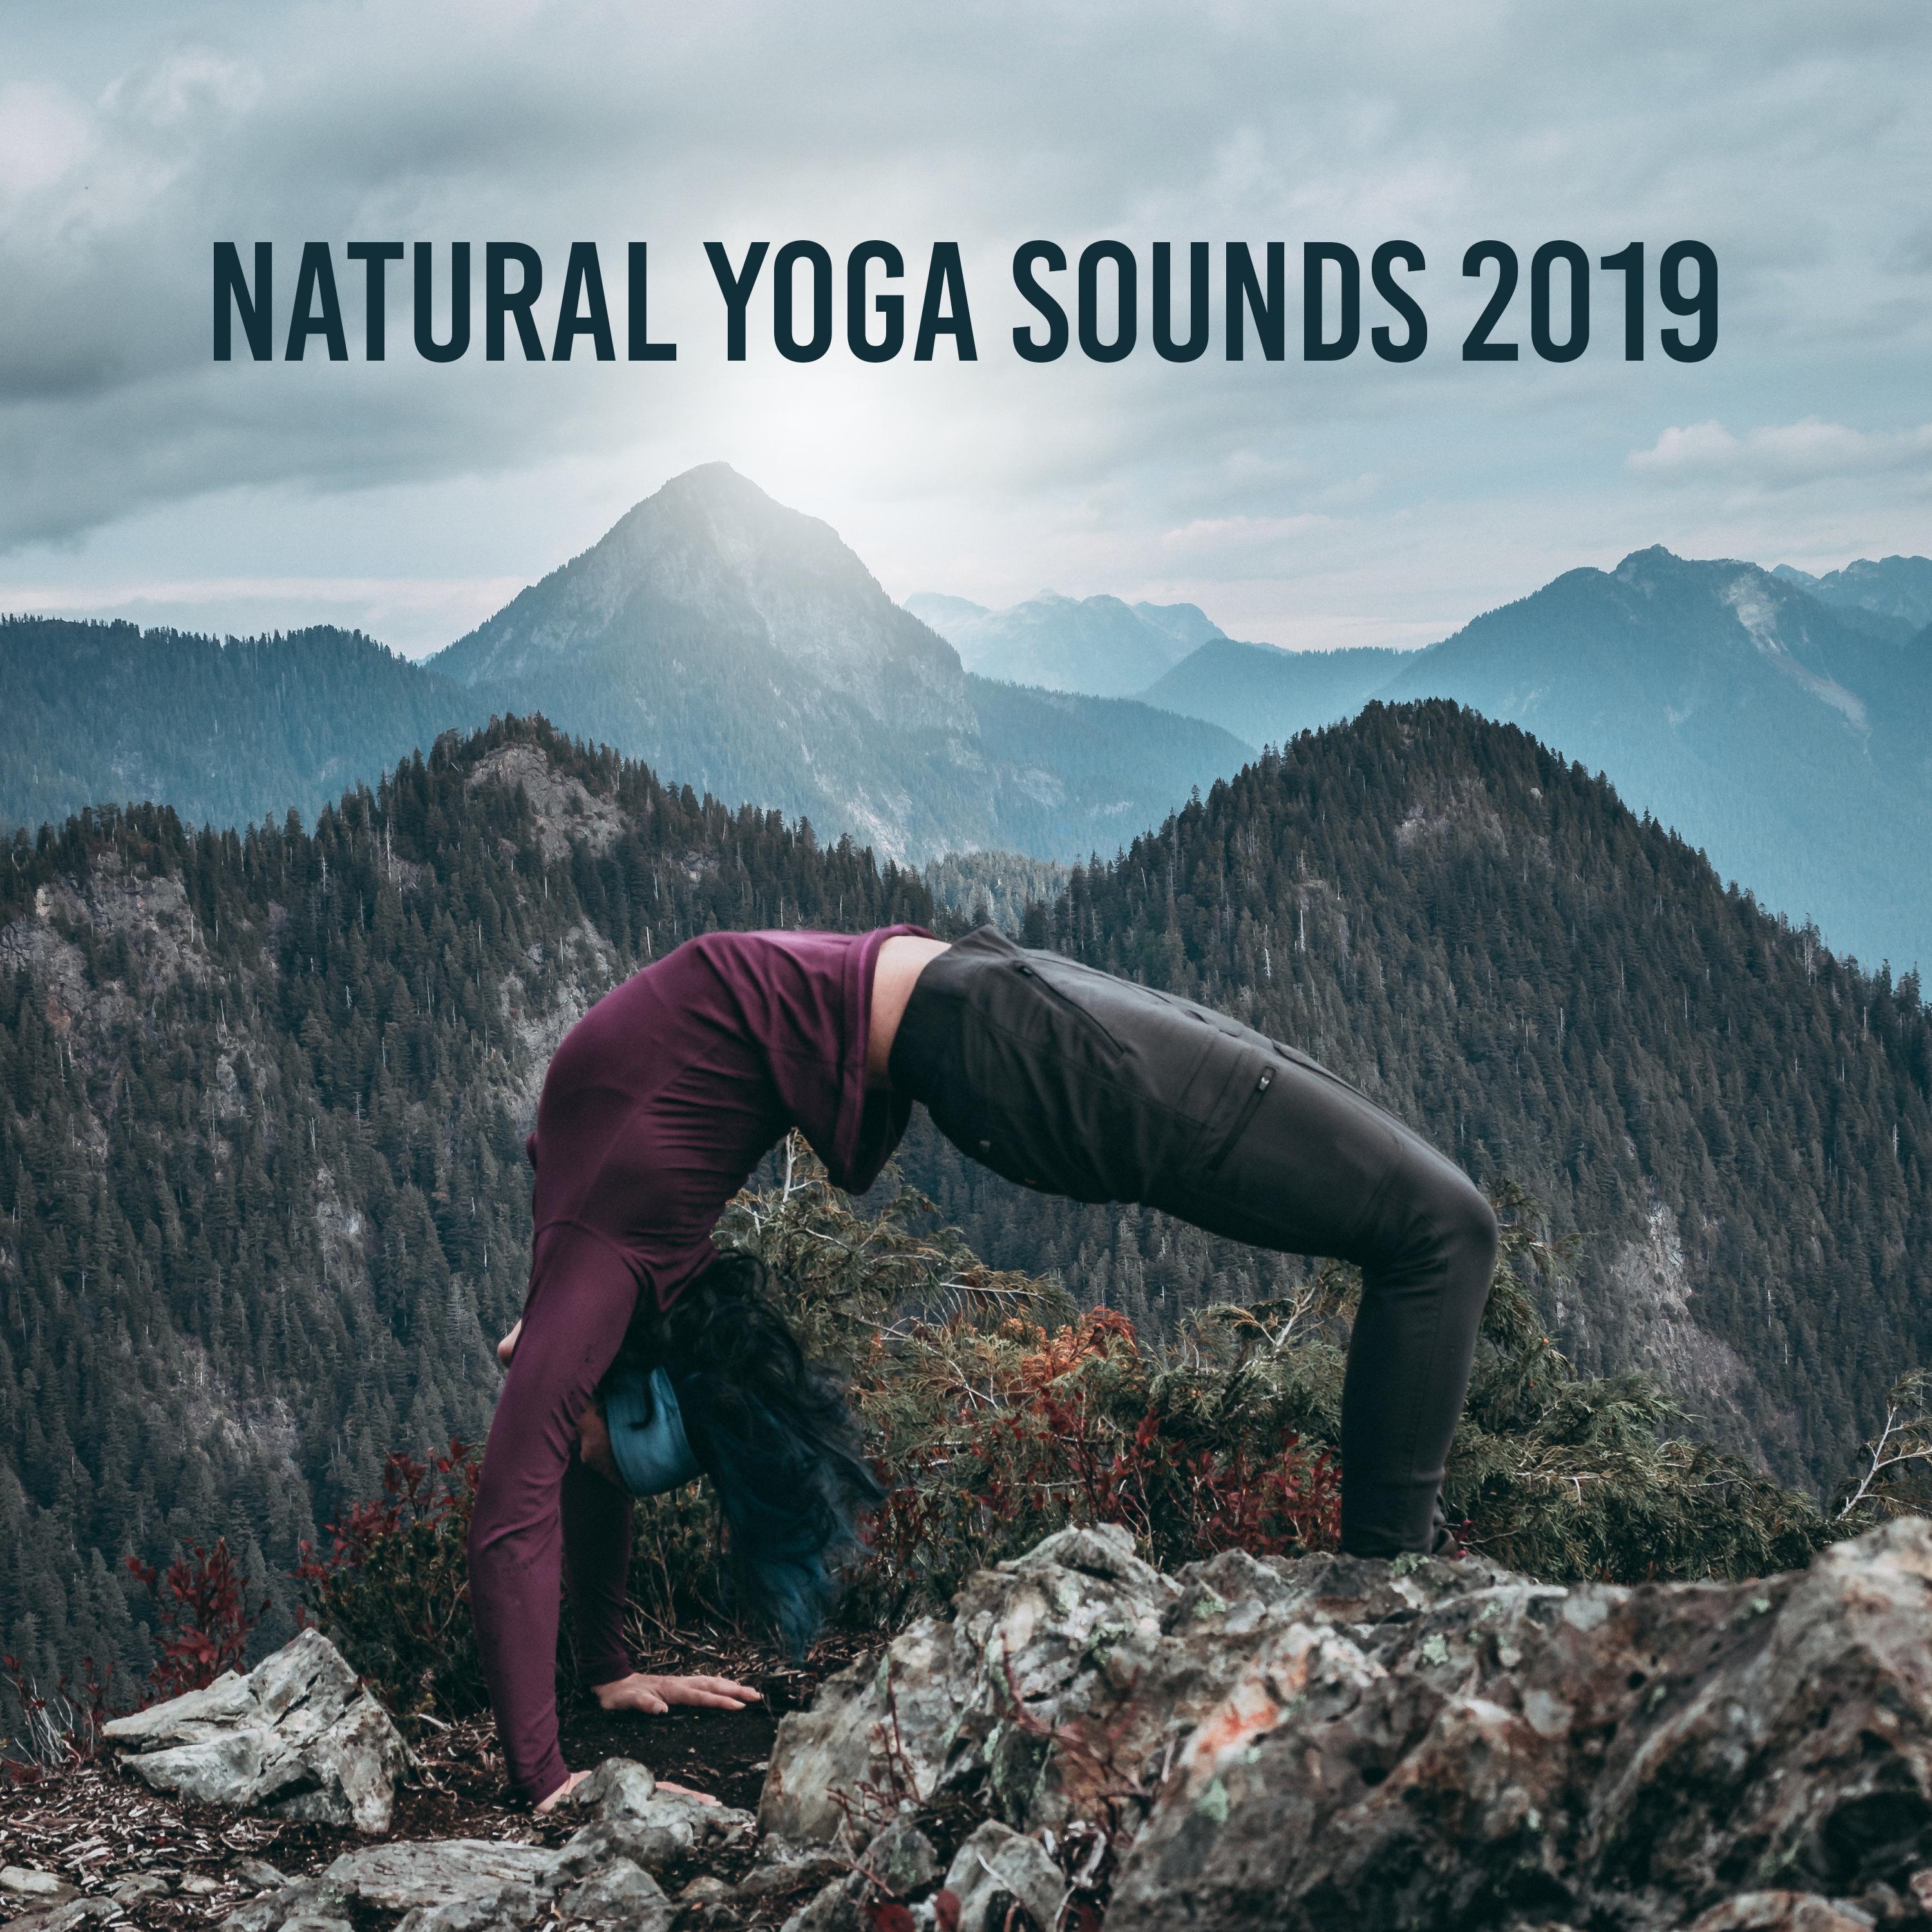 Natural Yoga Sounds 2019 – 15 New Age Songs for Meditation & Deep Relaxation, Nature Music, Zen Melodies, Mantra, Mindfullness Lullabies